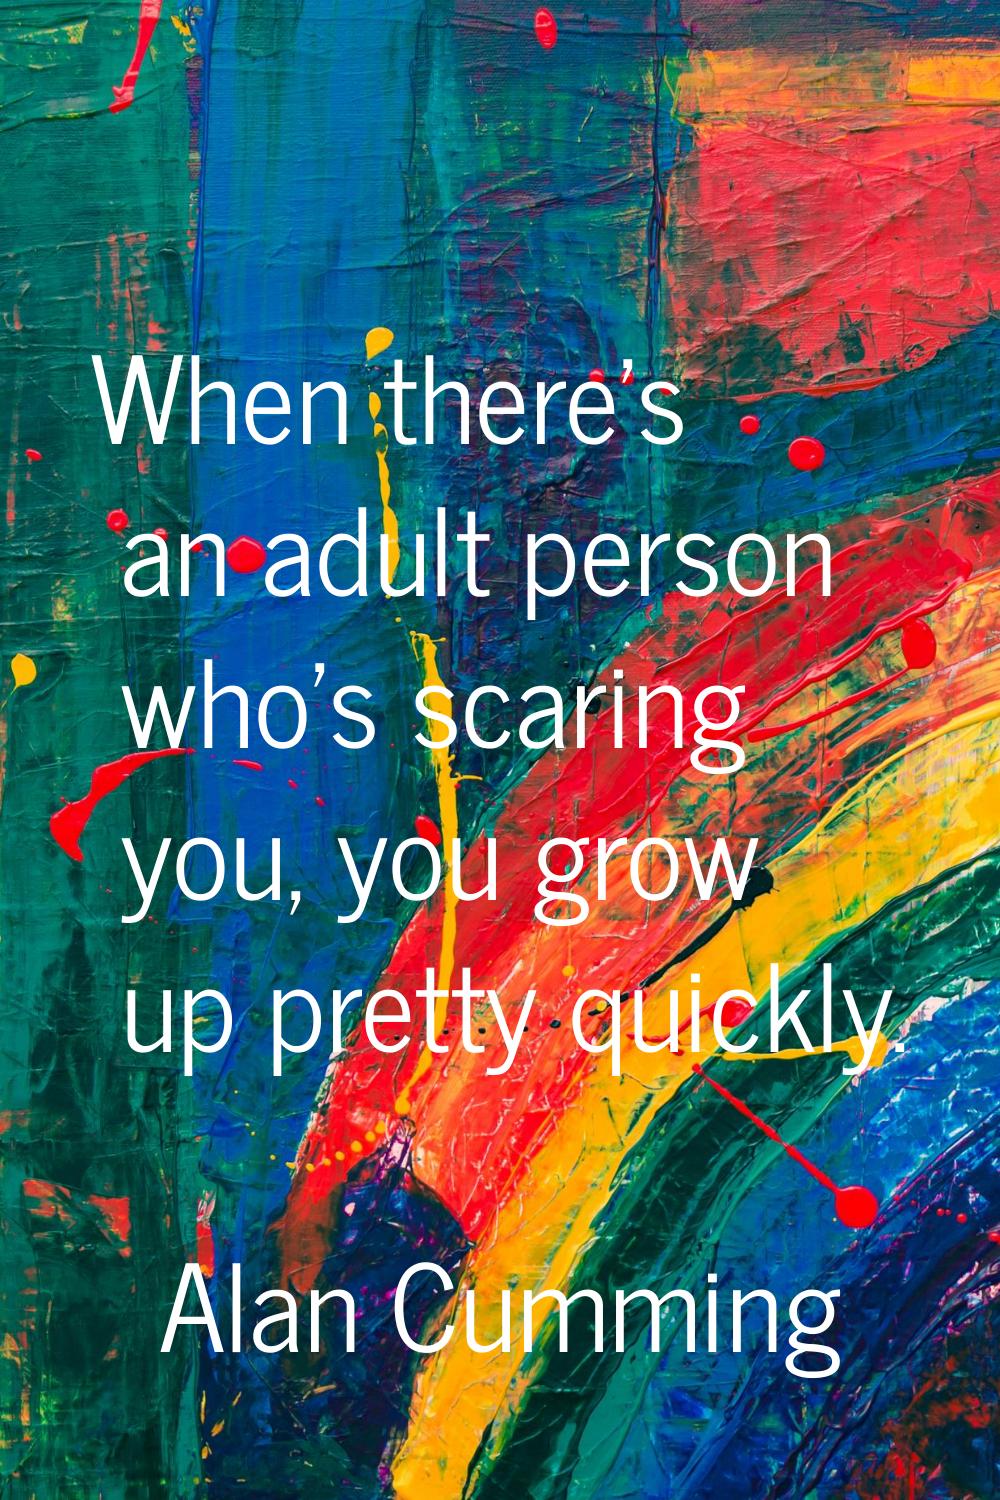 When there's an adult person who's scaring you, you grow up pretty quickly.